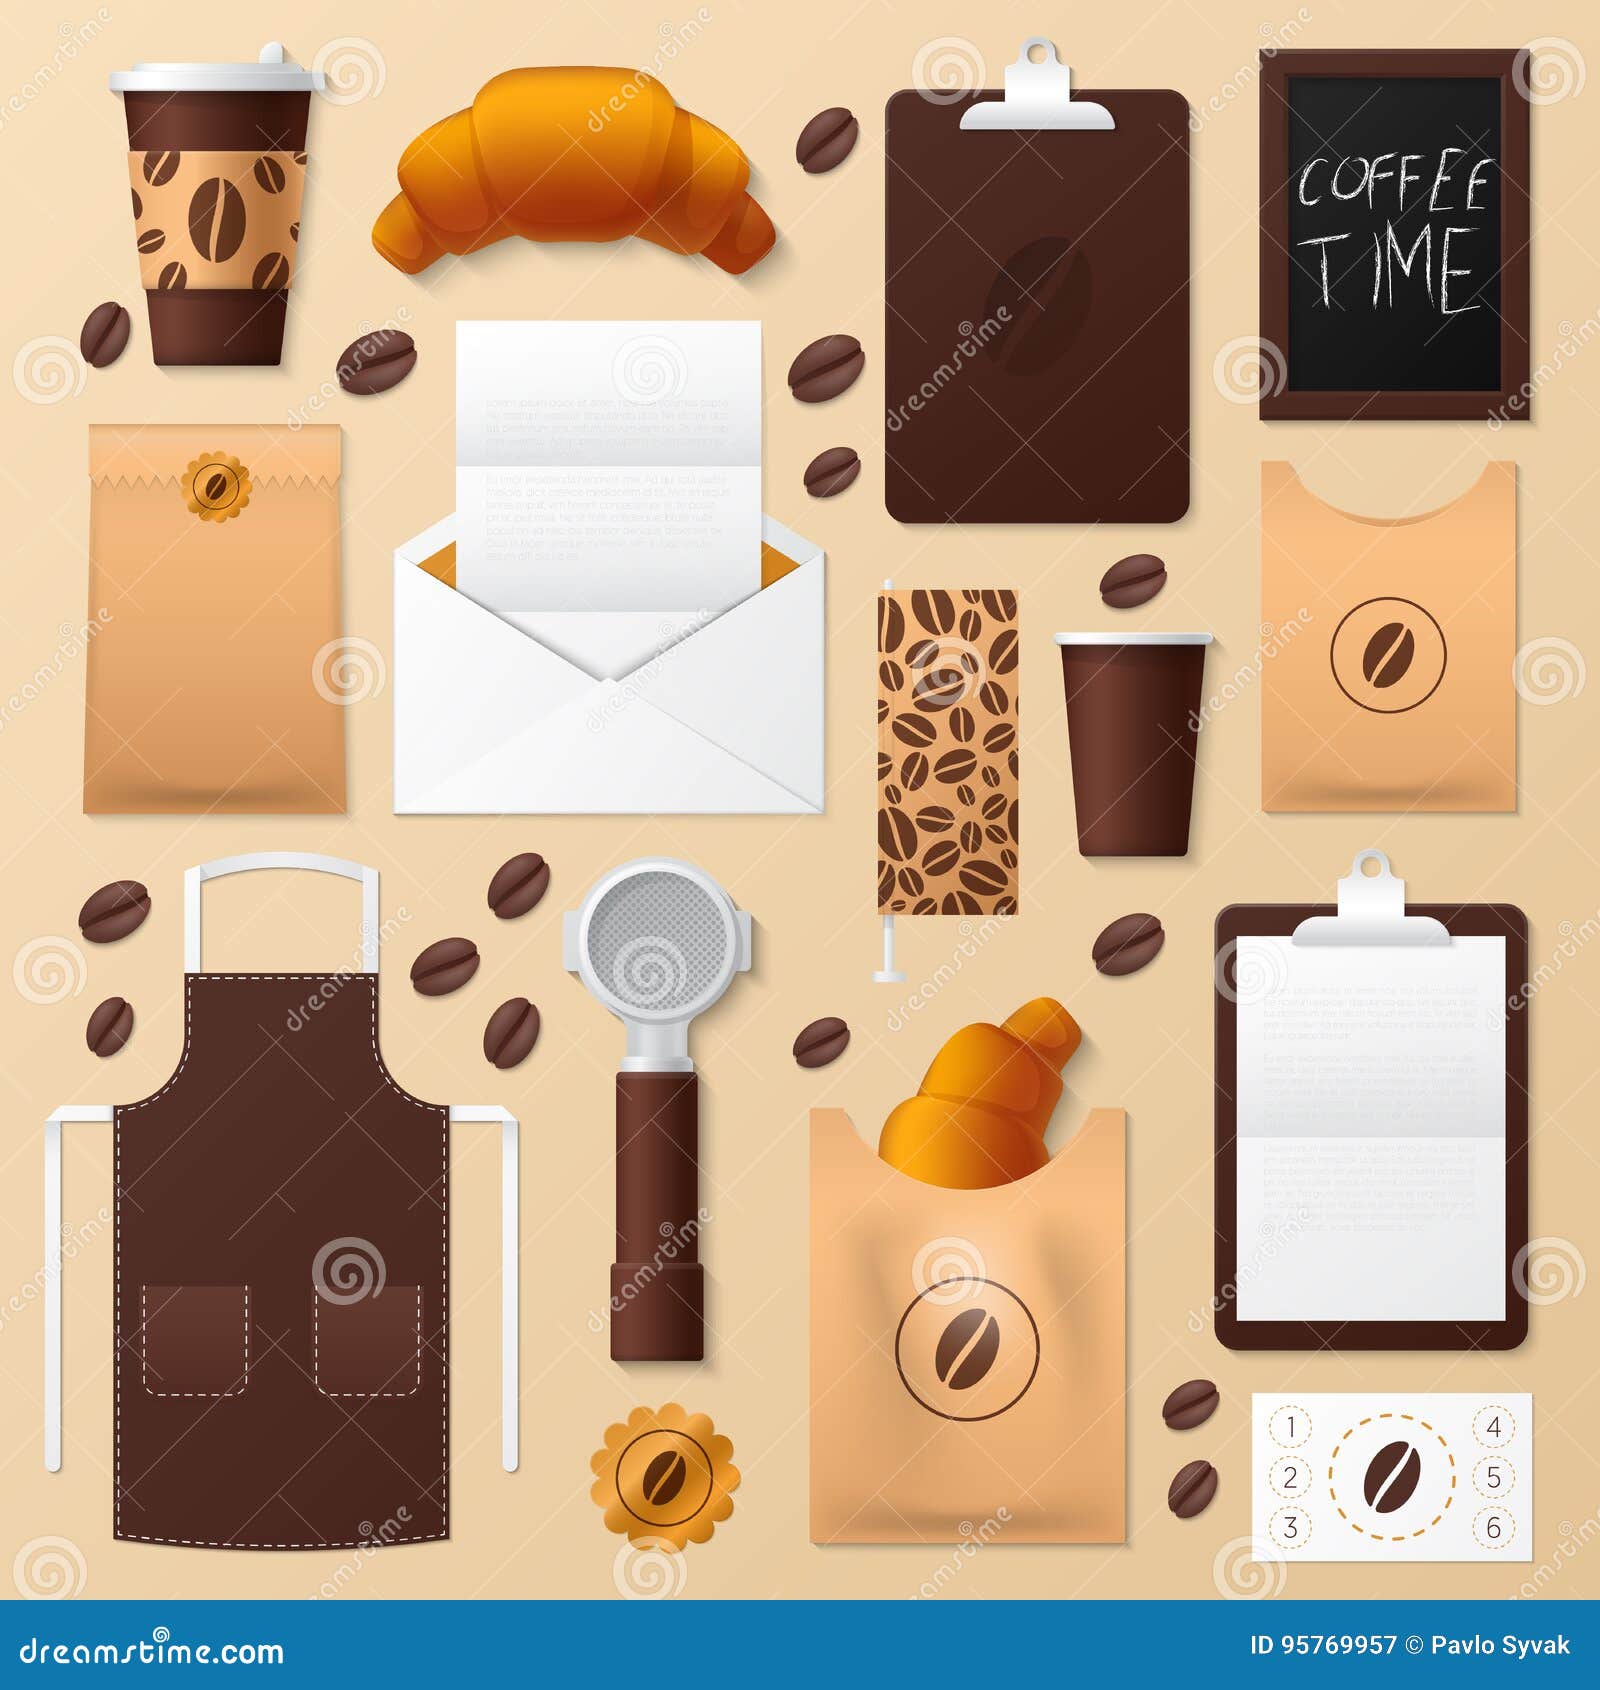 Download Coffee Shop Corporate Identity Template Set. Cafe ...